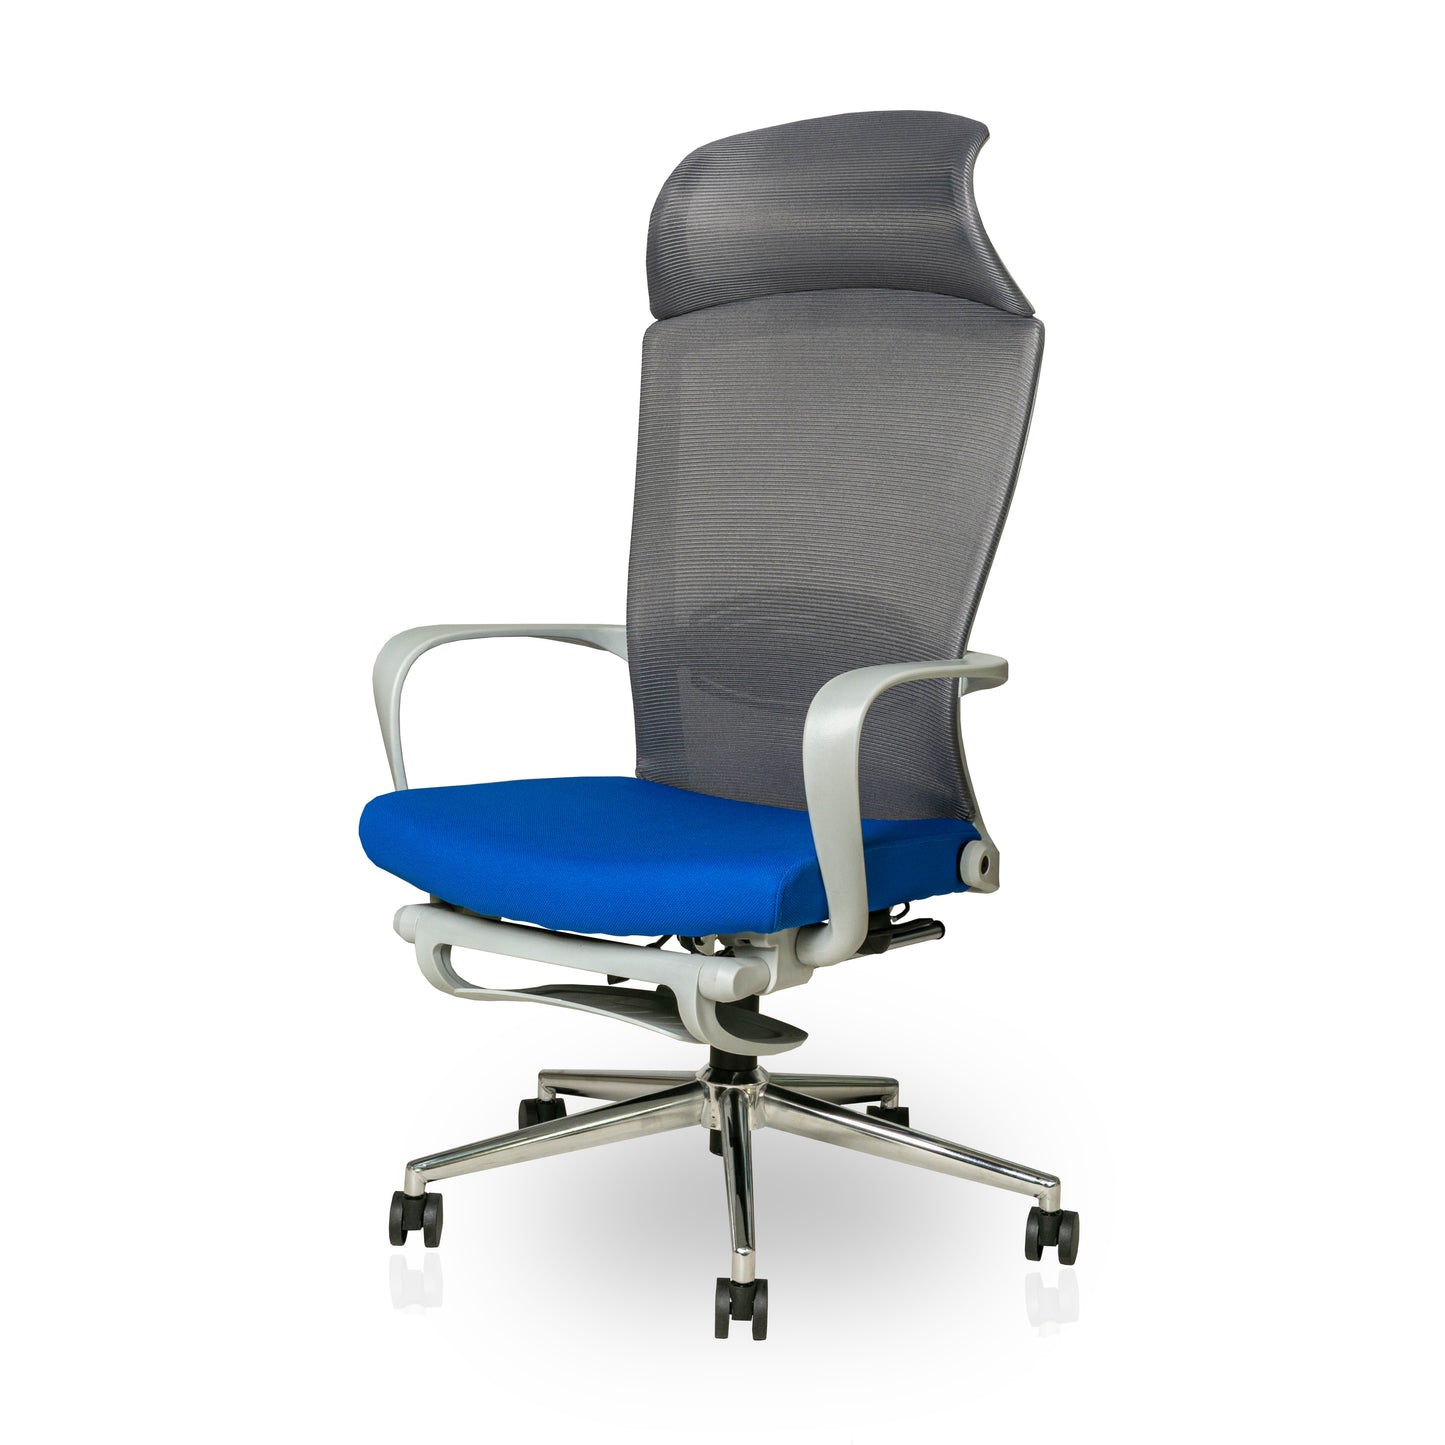 Load image into Gallery viewer, Caspian Chair with Headrest and Footrest - ContractWorld Furniture